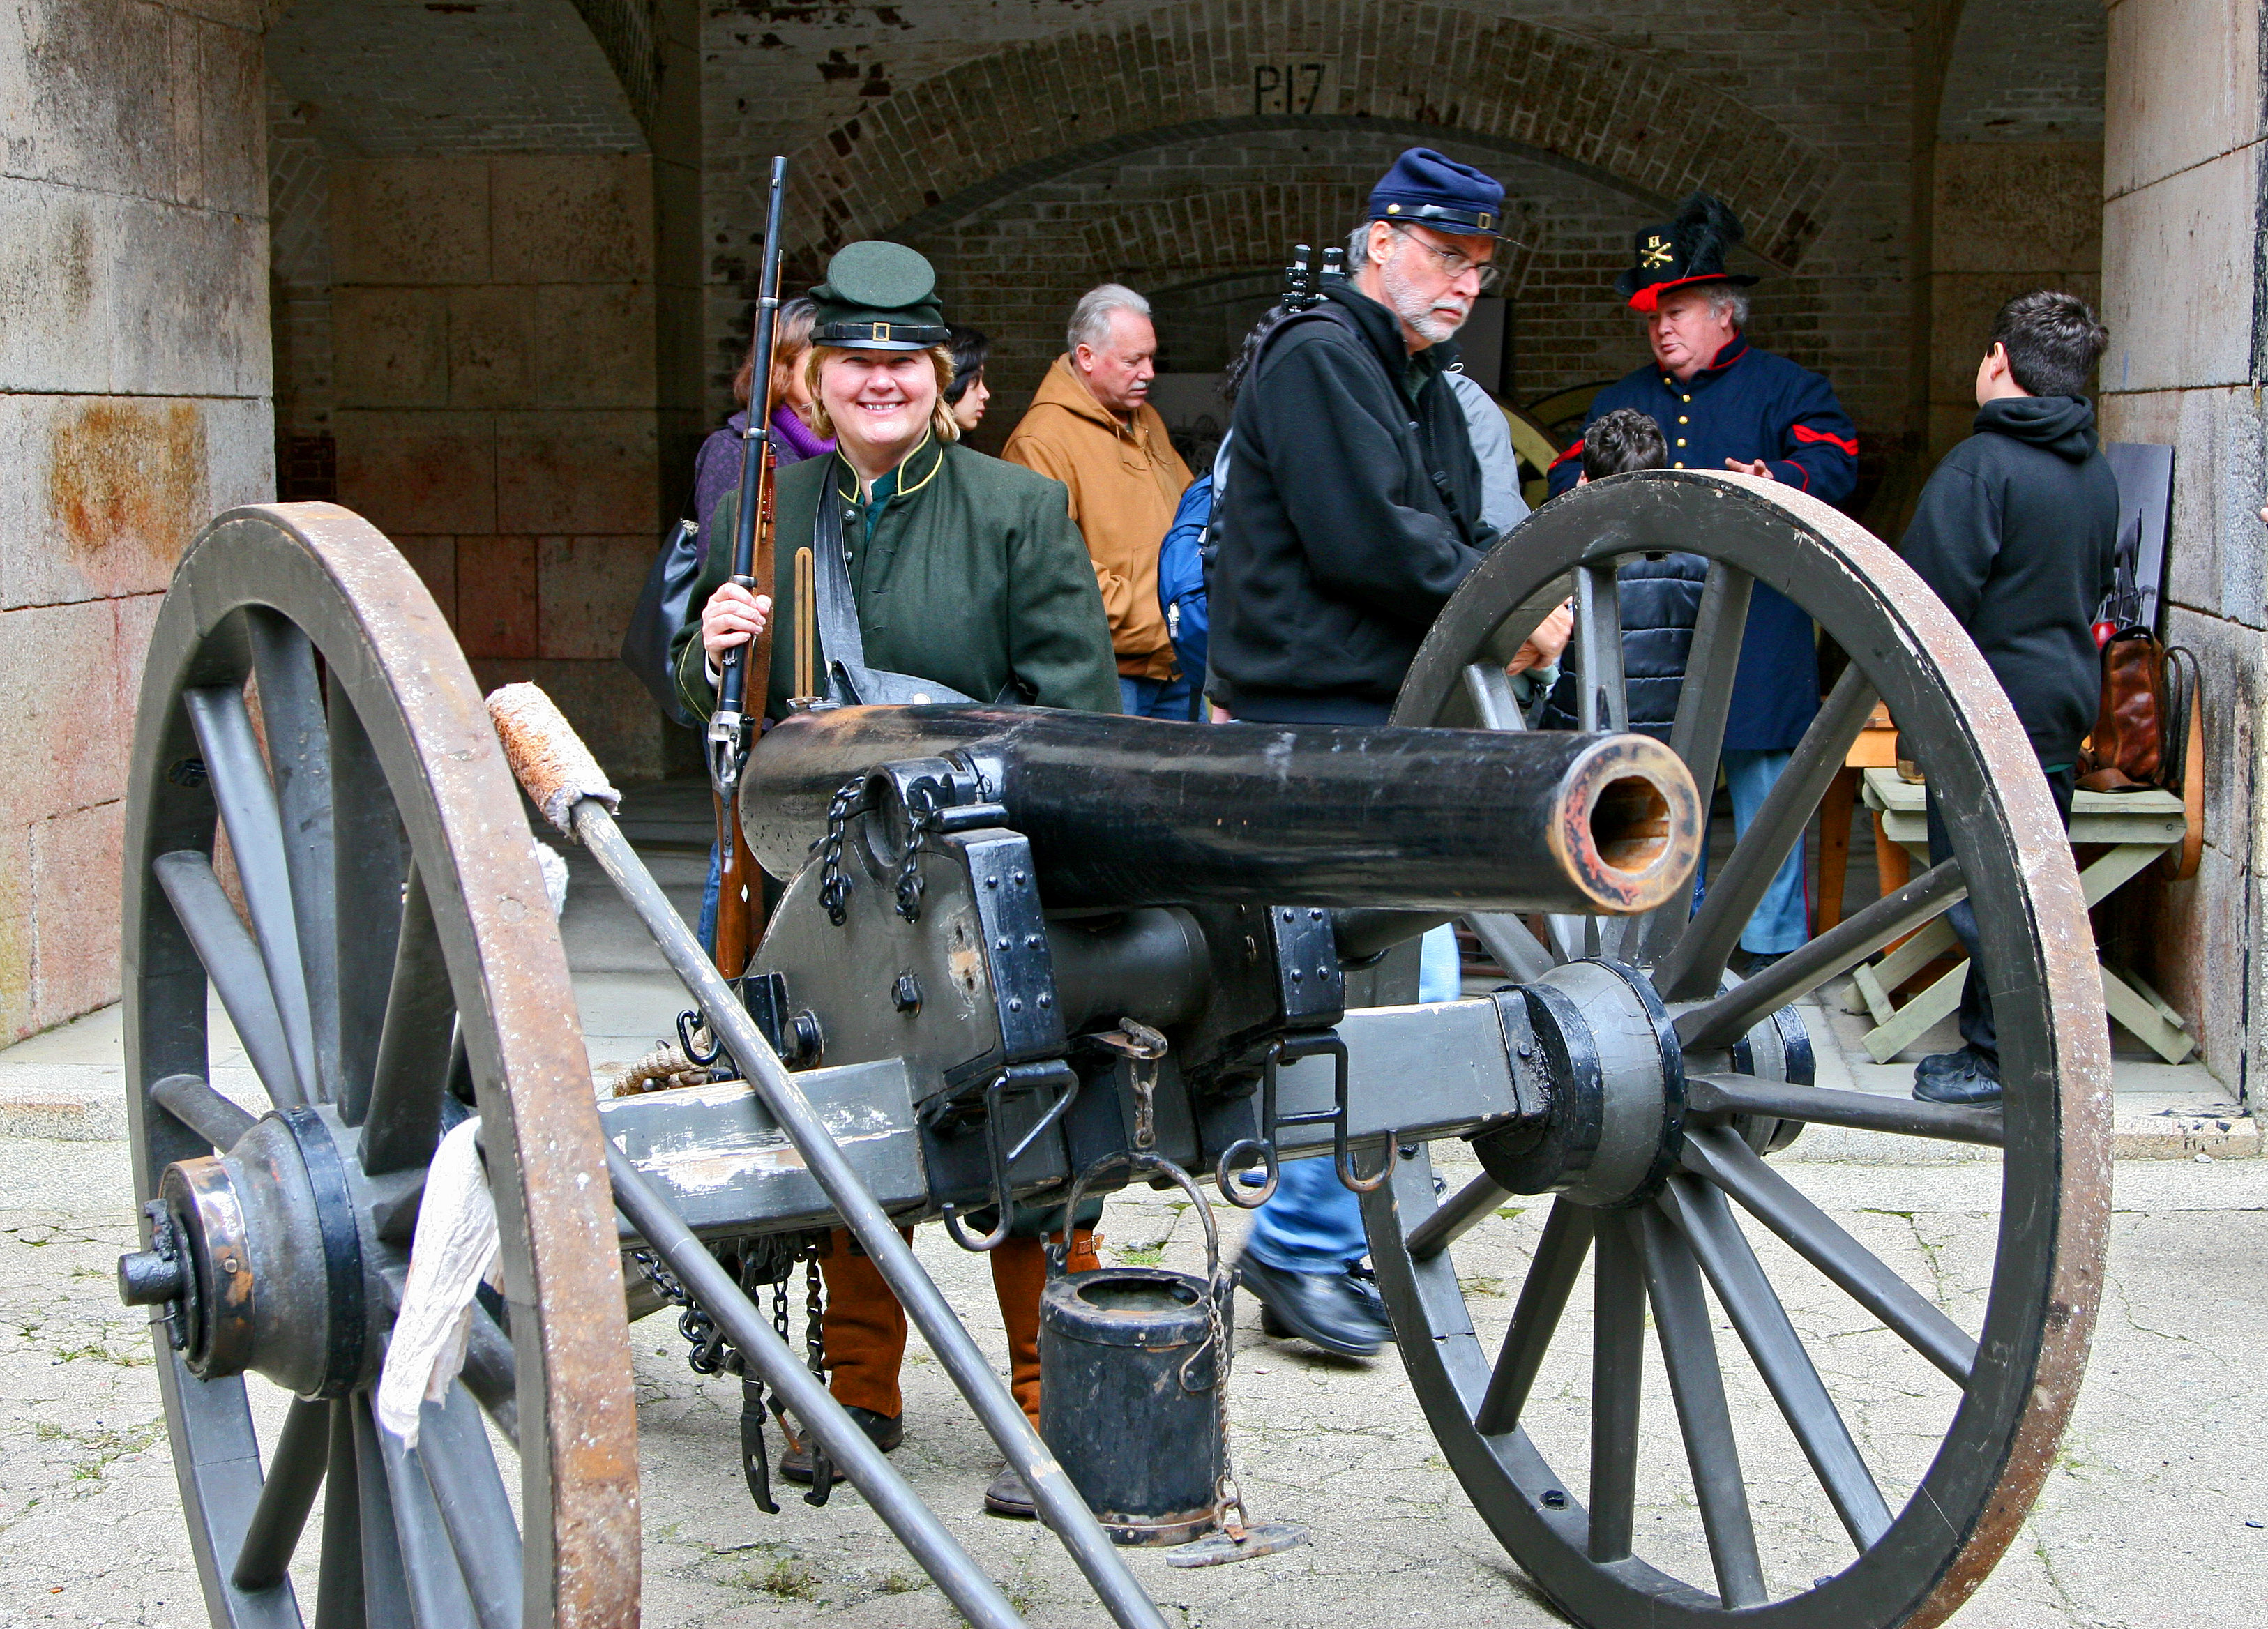 A cannon stands in front of Civil War re-enactors talking to the public.